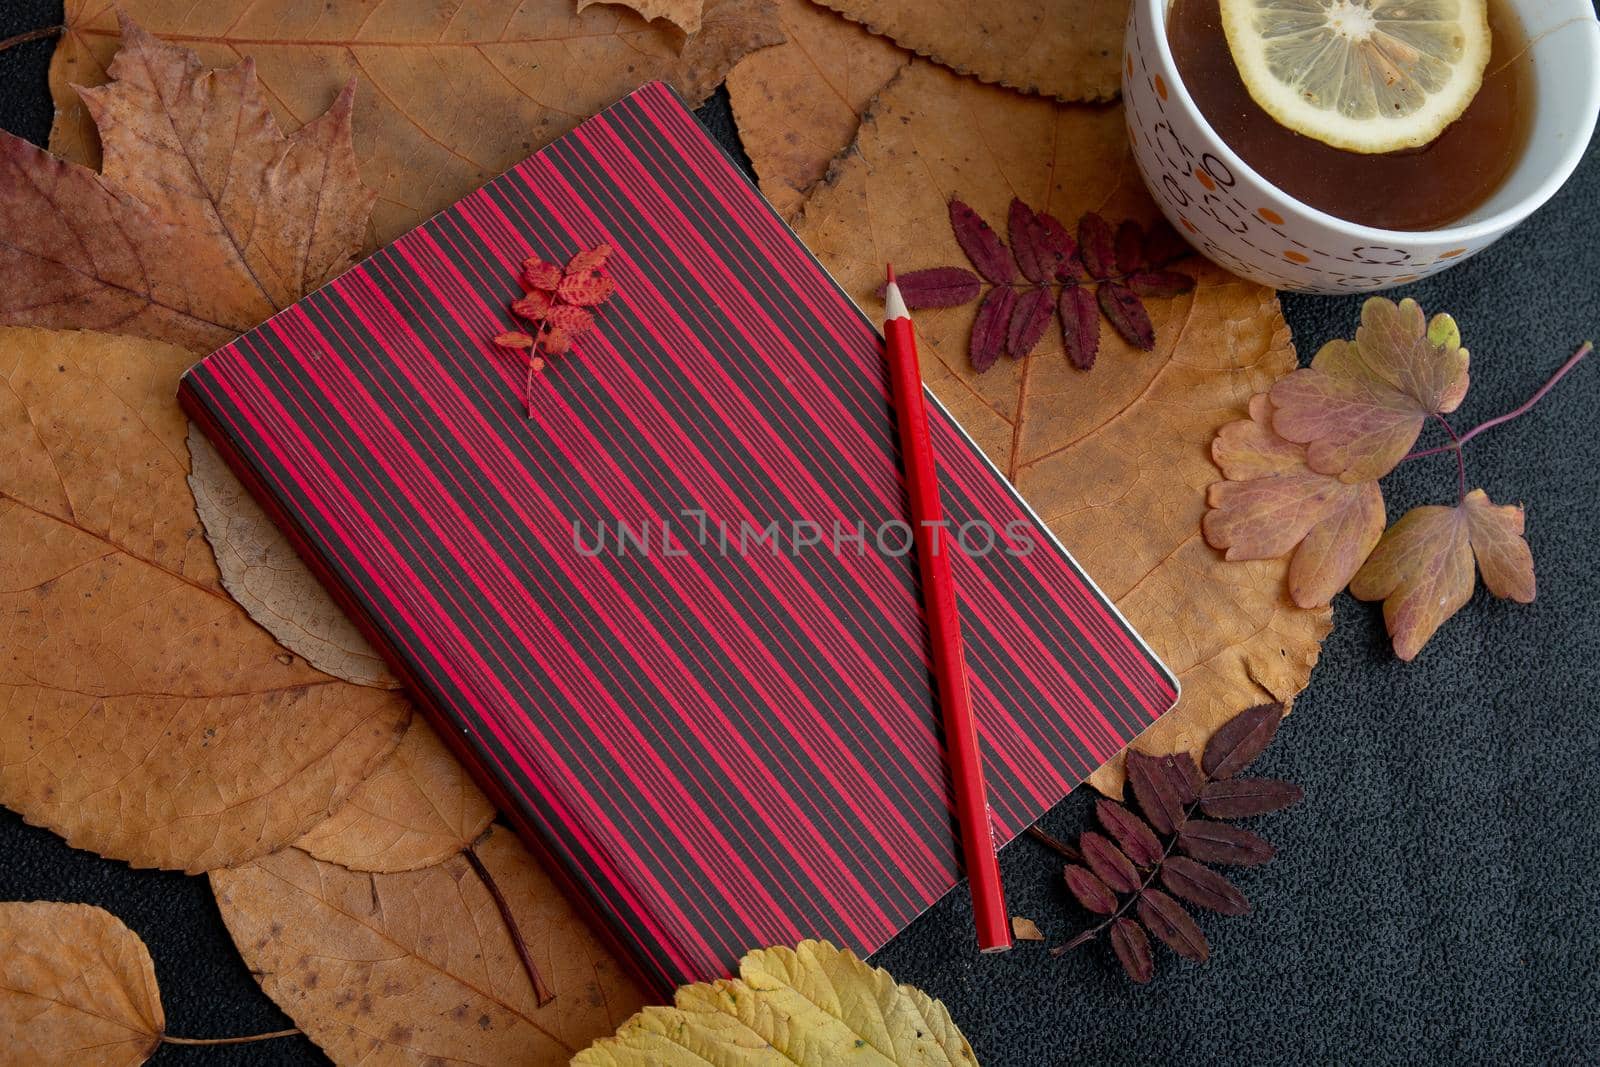 red pencil on a red striped notebook lies on dry autumn leaves a cup with tea with lemon on a cherng background autumn yellow orange